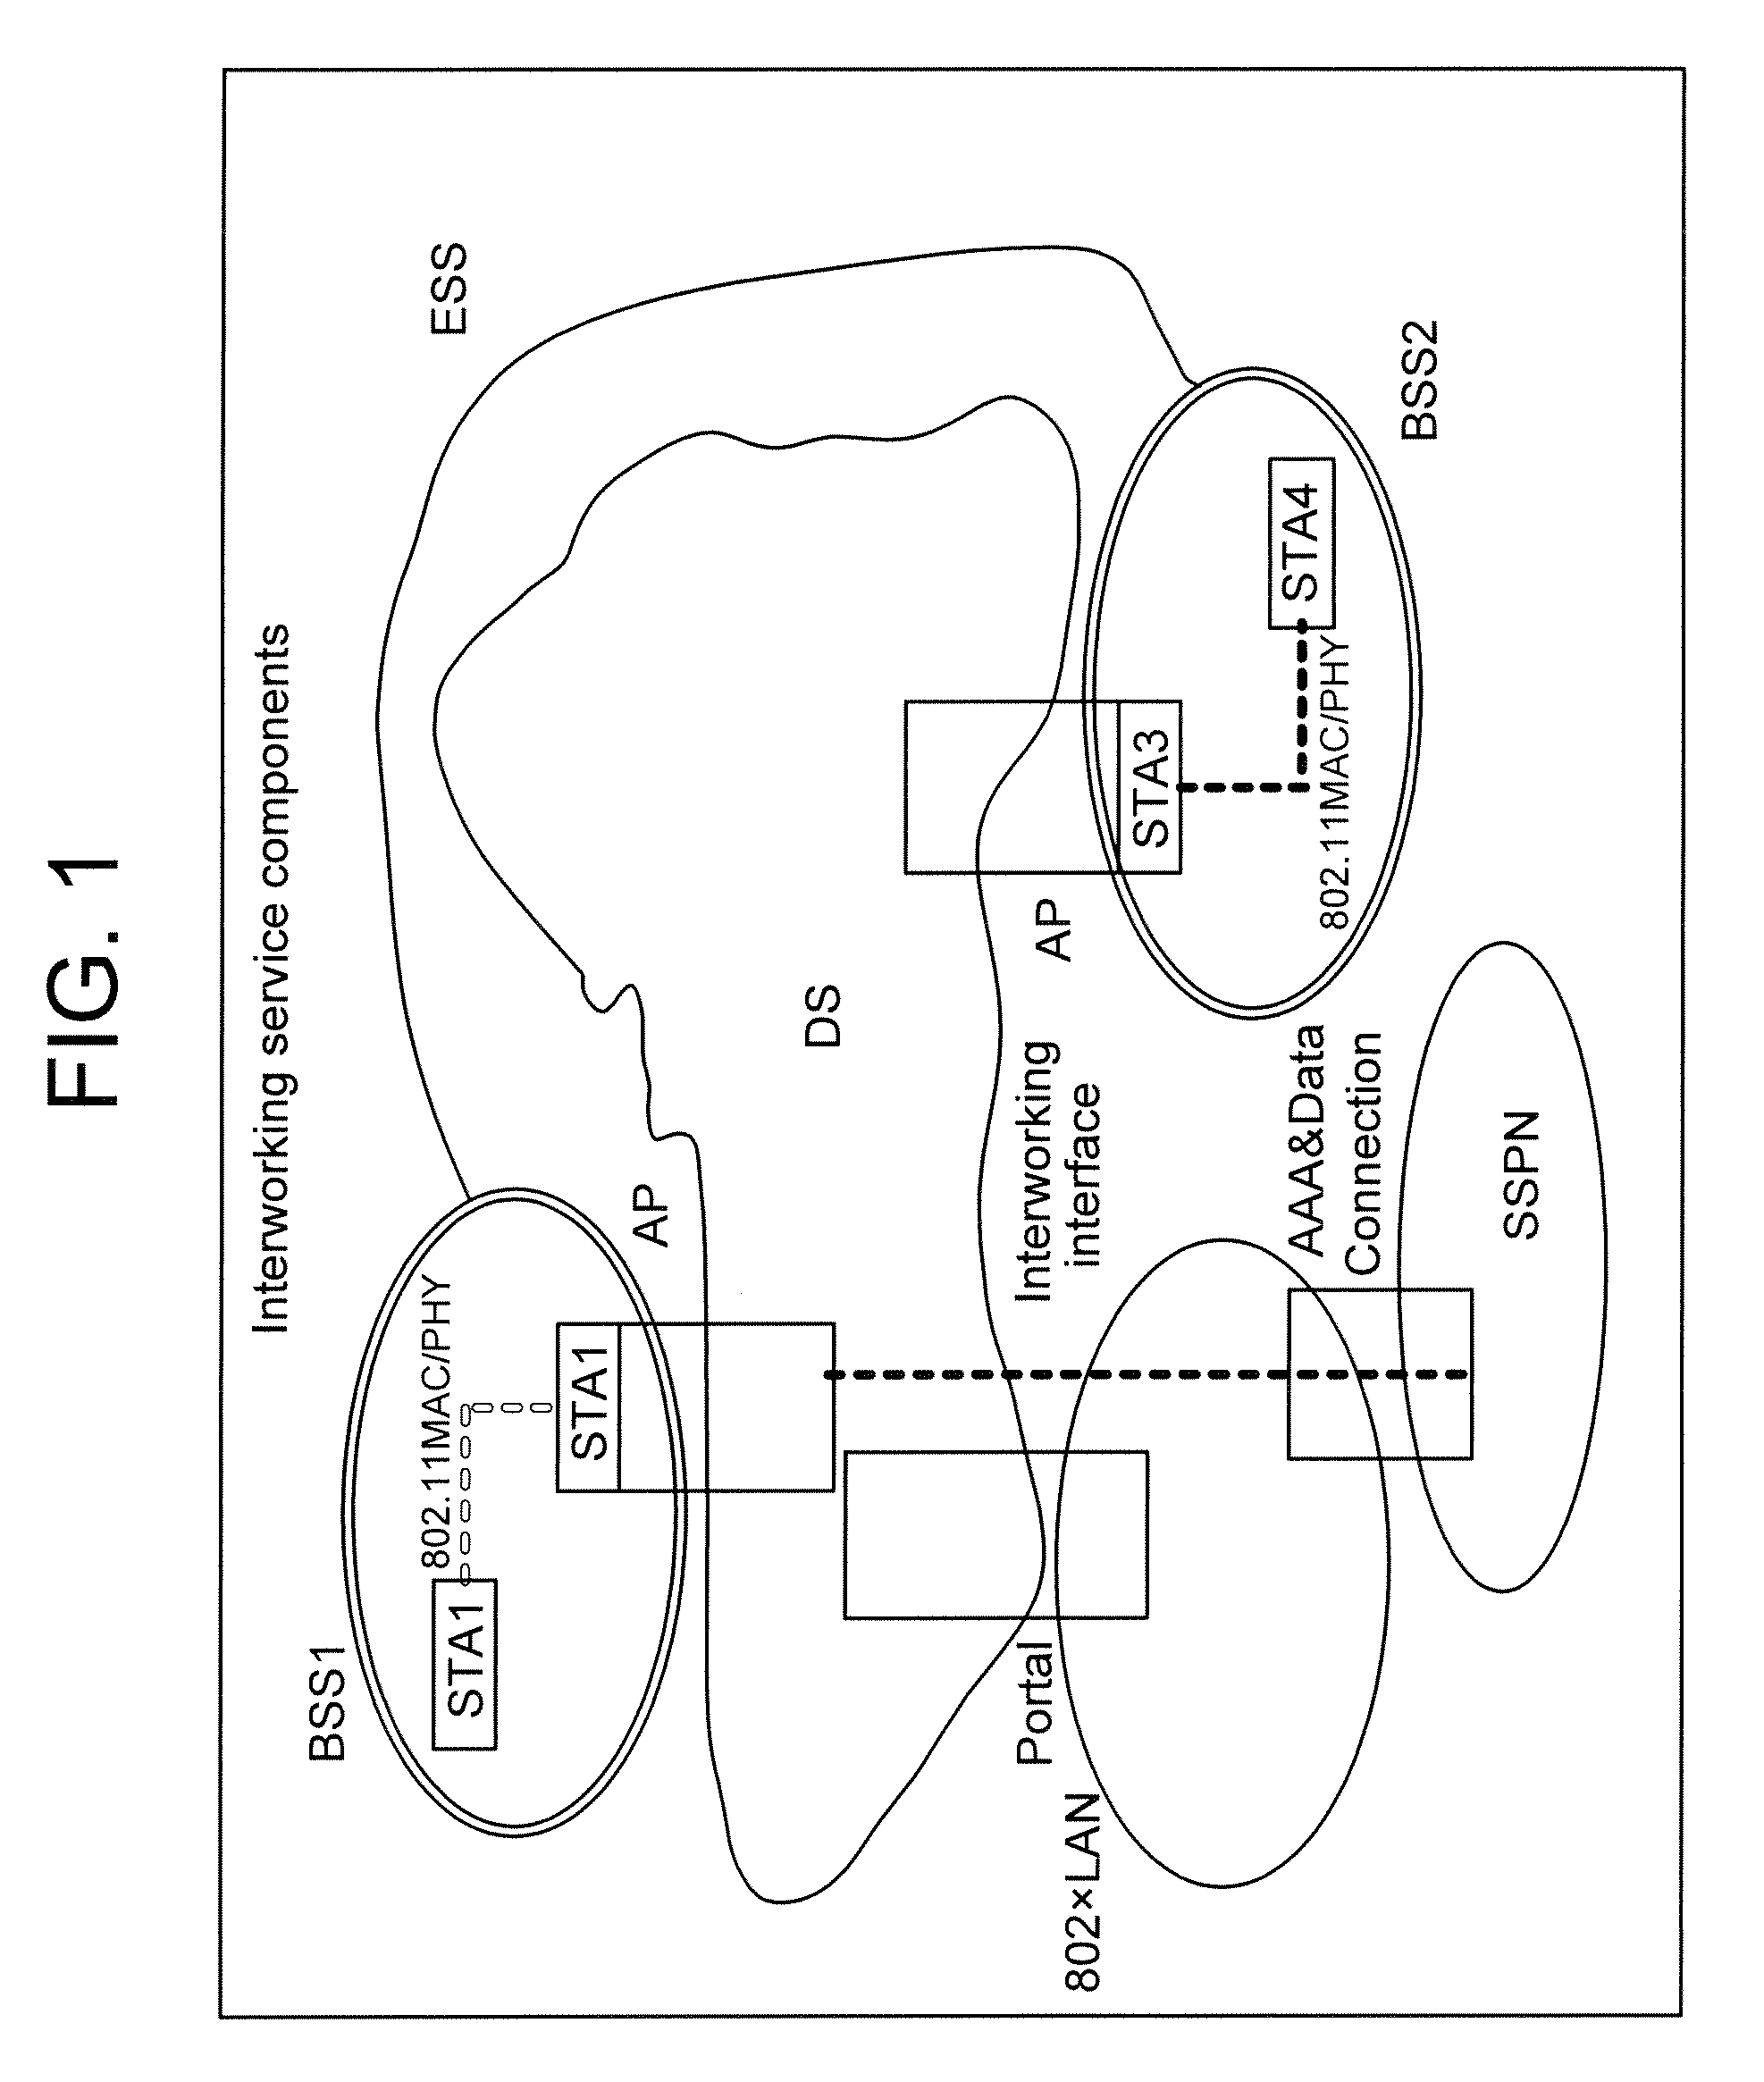 Interworking procedure with external network in wireless LAN and message format for the same